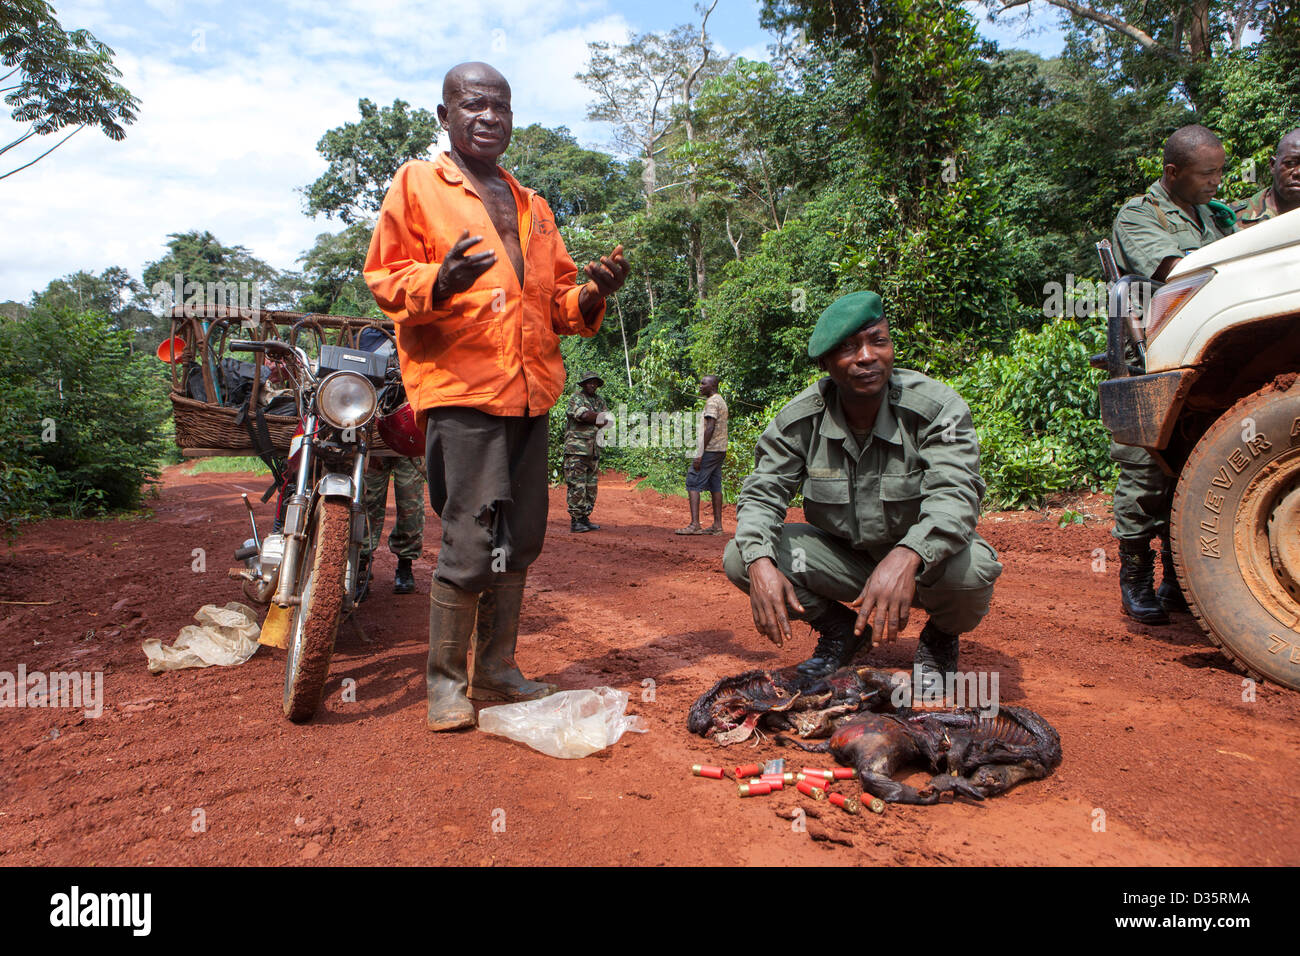 CONGO, 27th Sept 2012: Ecoguards stop a poacher carrying bushmeat. No hunting is allowed in this area. Stock Photo